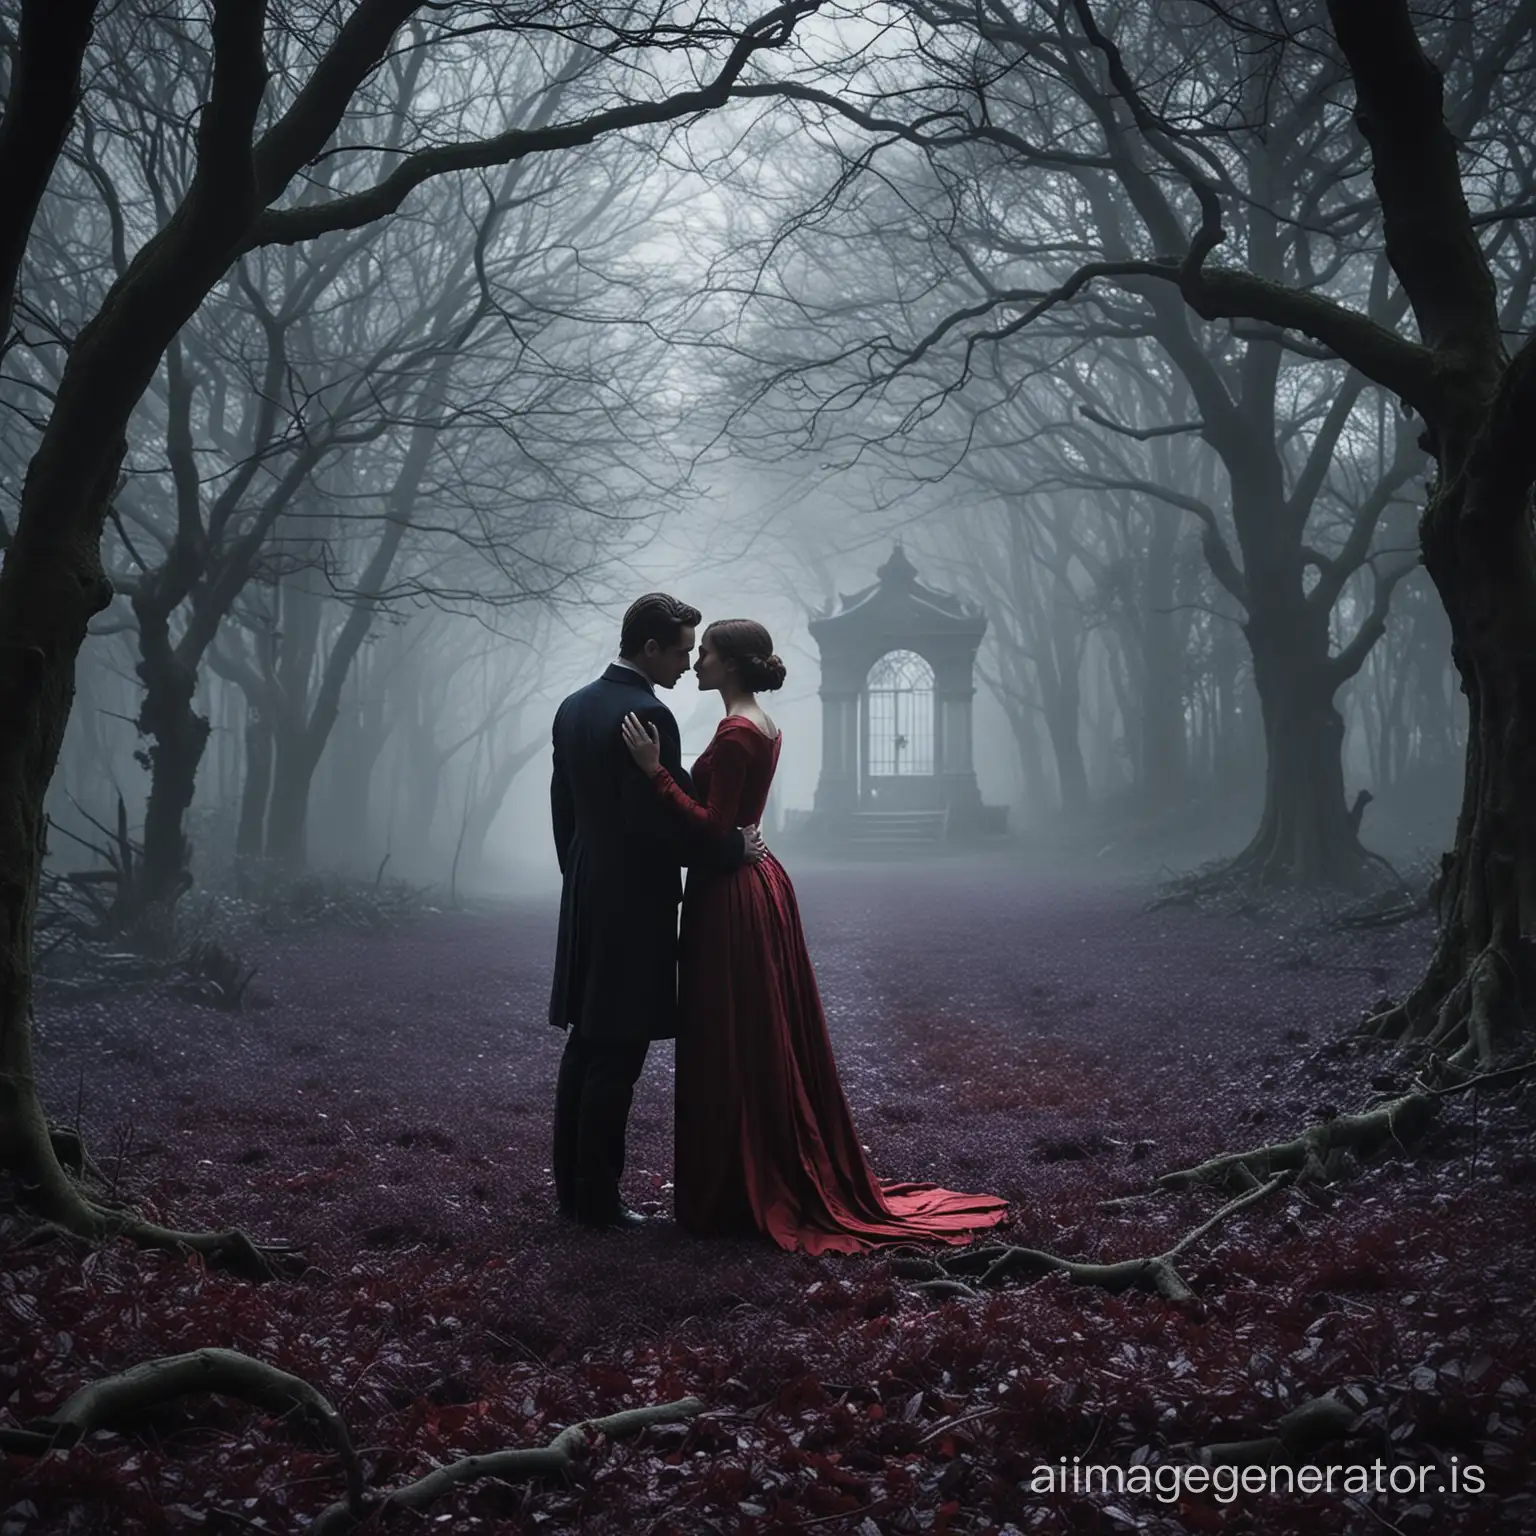 a striking image of a forbidden setting, such as a secluded garden, an old mansion, or a misty forest. In the foreground, there could be silhouettes of a man and a woman, representing the main characters, caught in a moment of intimacy or tension. The atmosphere is filled with intrigue and passion, with hints of mystery and danger lurking in the background. Evoke a theme of forbidden love and the consequences of crossing boundaries. The overall color palette could include deep shades of purple, blue, or red to convey the intensity of emotions and the allure of forbidden desires.